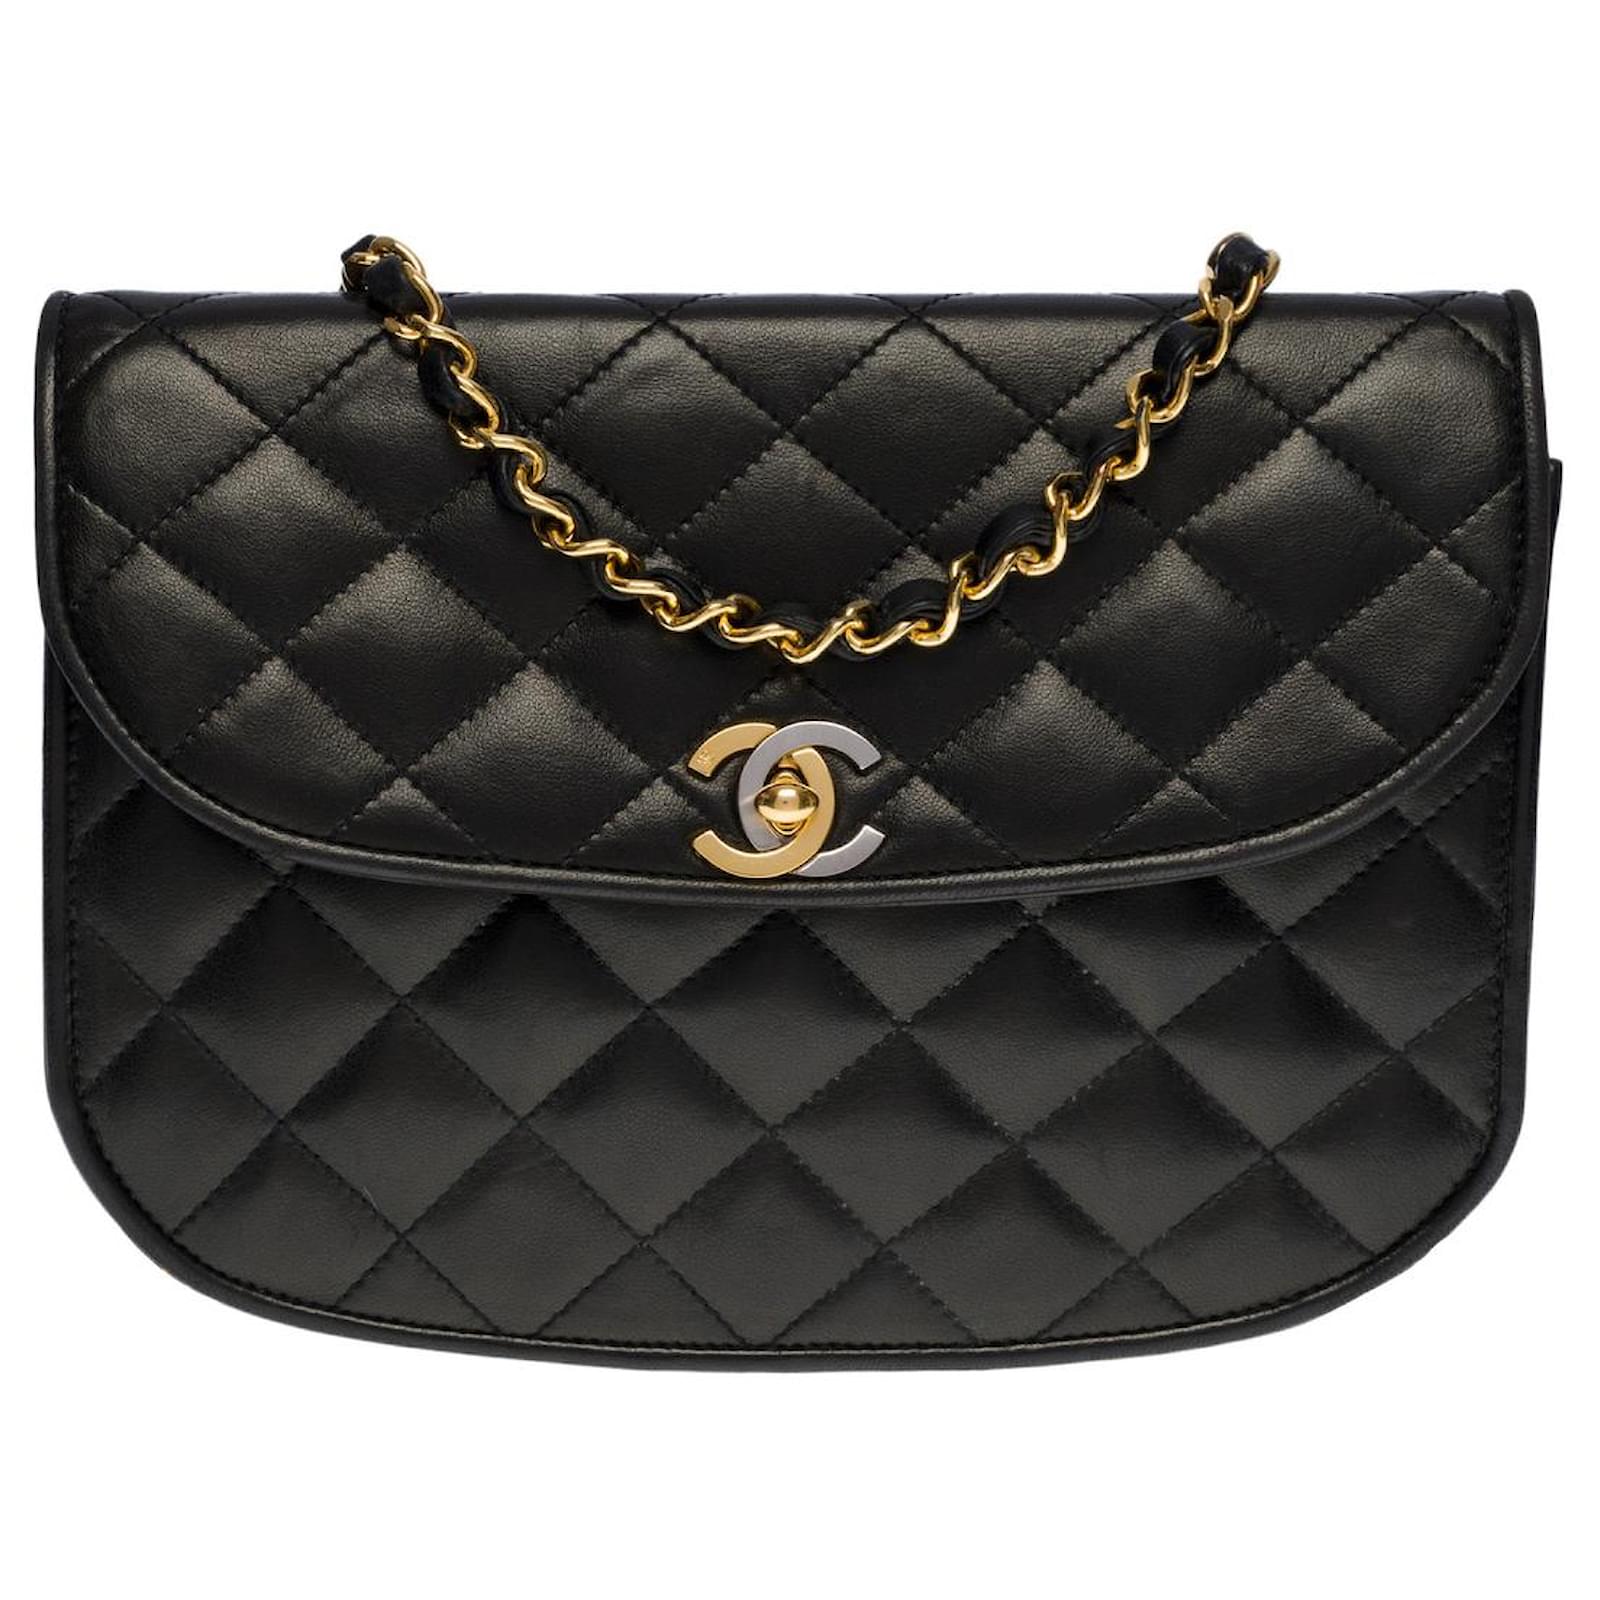 Handbags Chanel Classic Flap Bag Crossbody Bag in Black Quilted Lamb Leather -100387